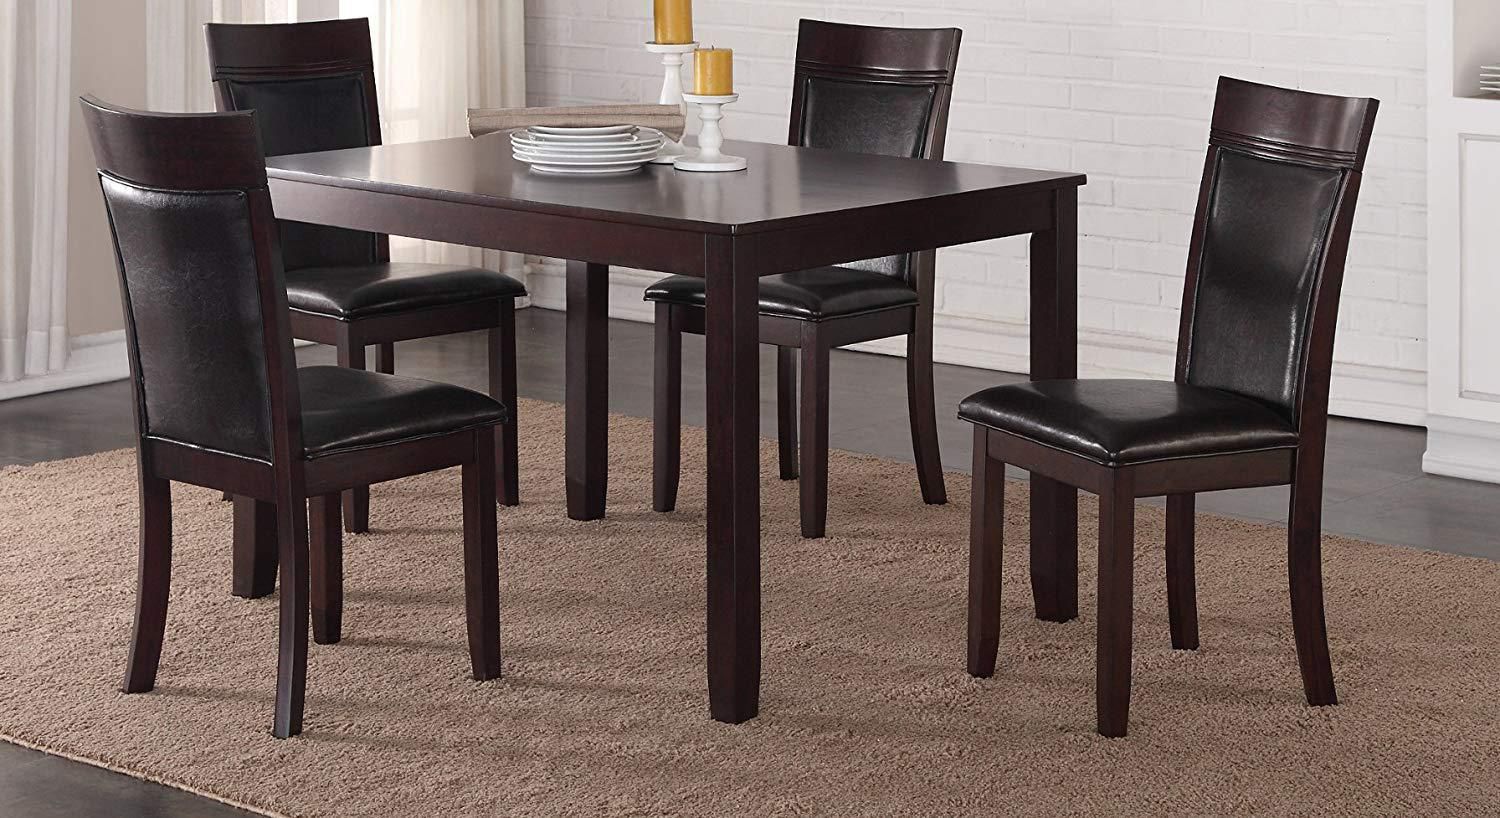 K LIVING Nellie Dining Table Walmart Canada